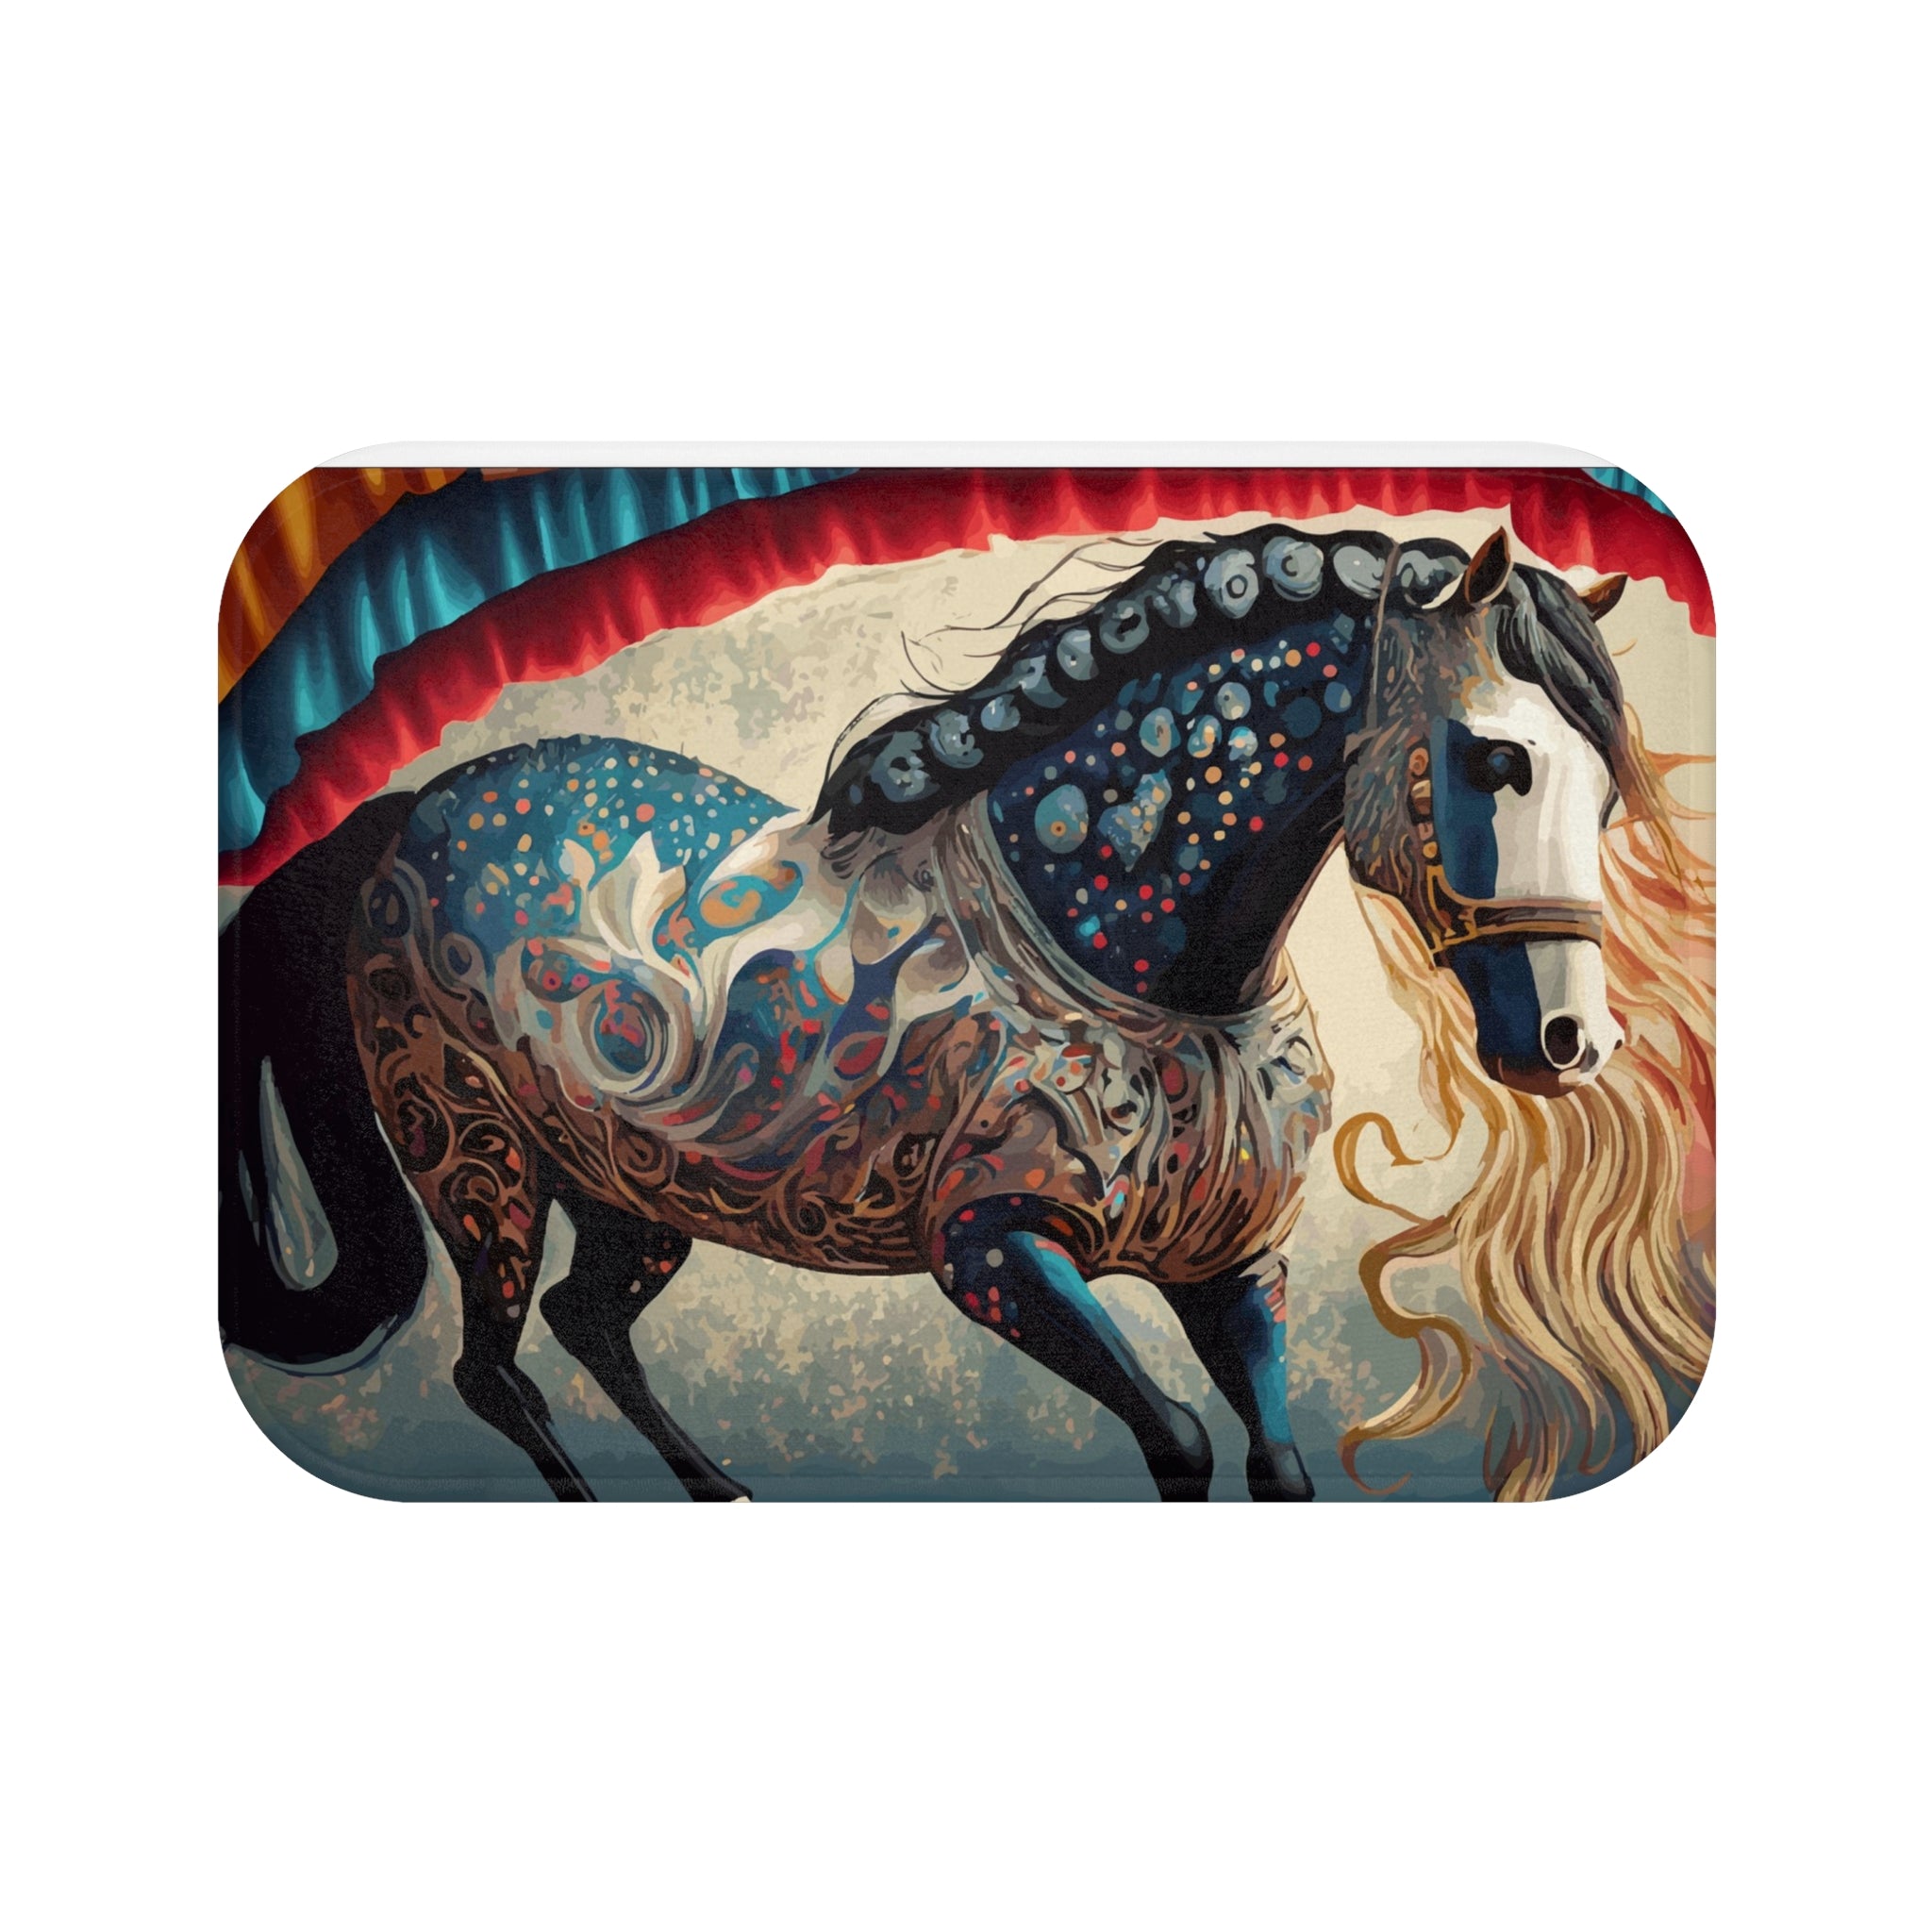 Bejeweled Horse with Long Mane Bath Mat